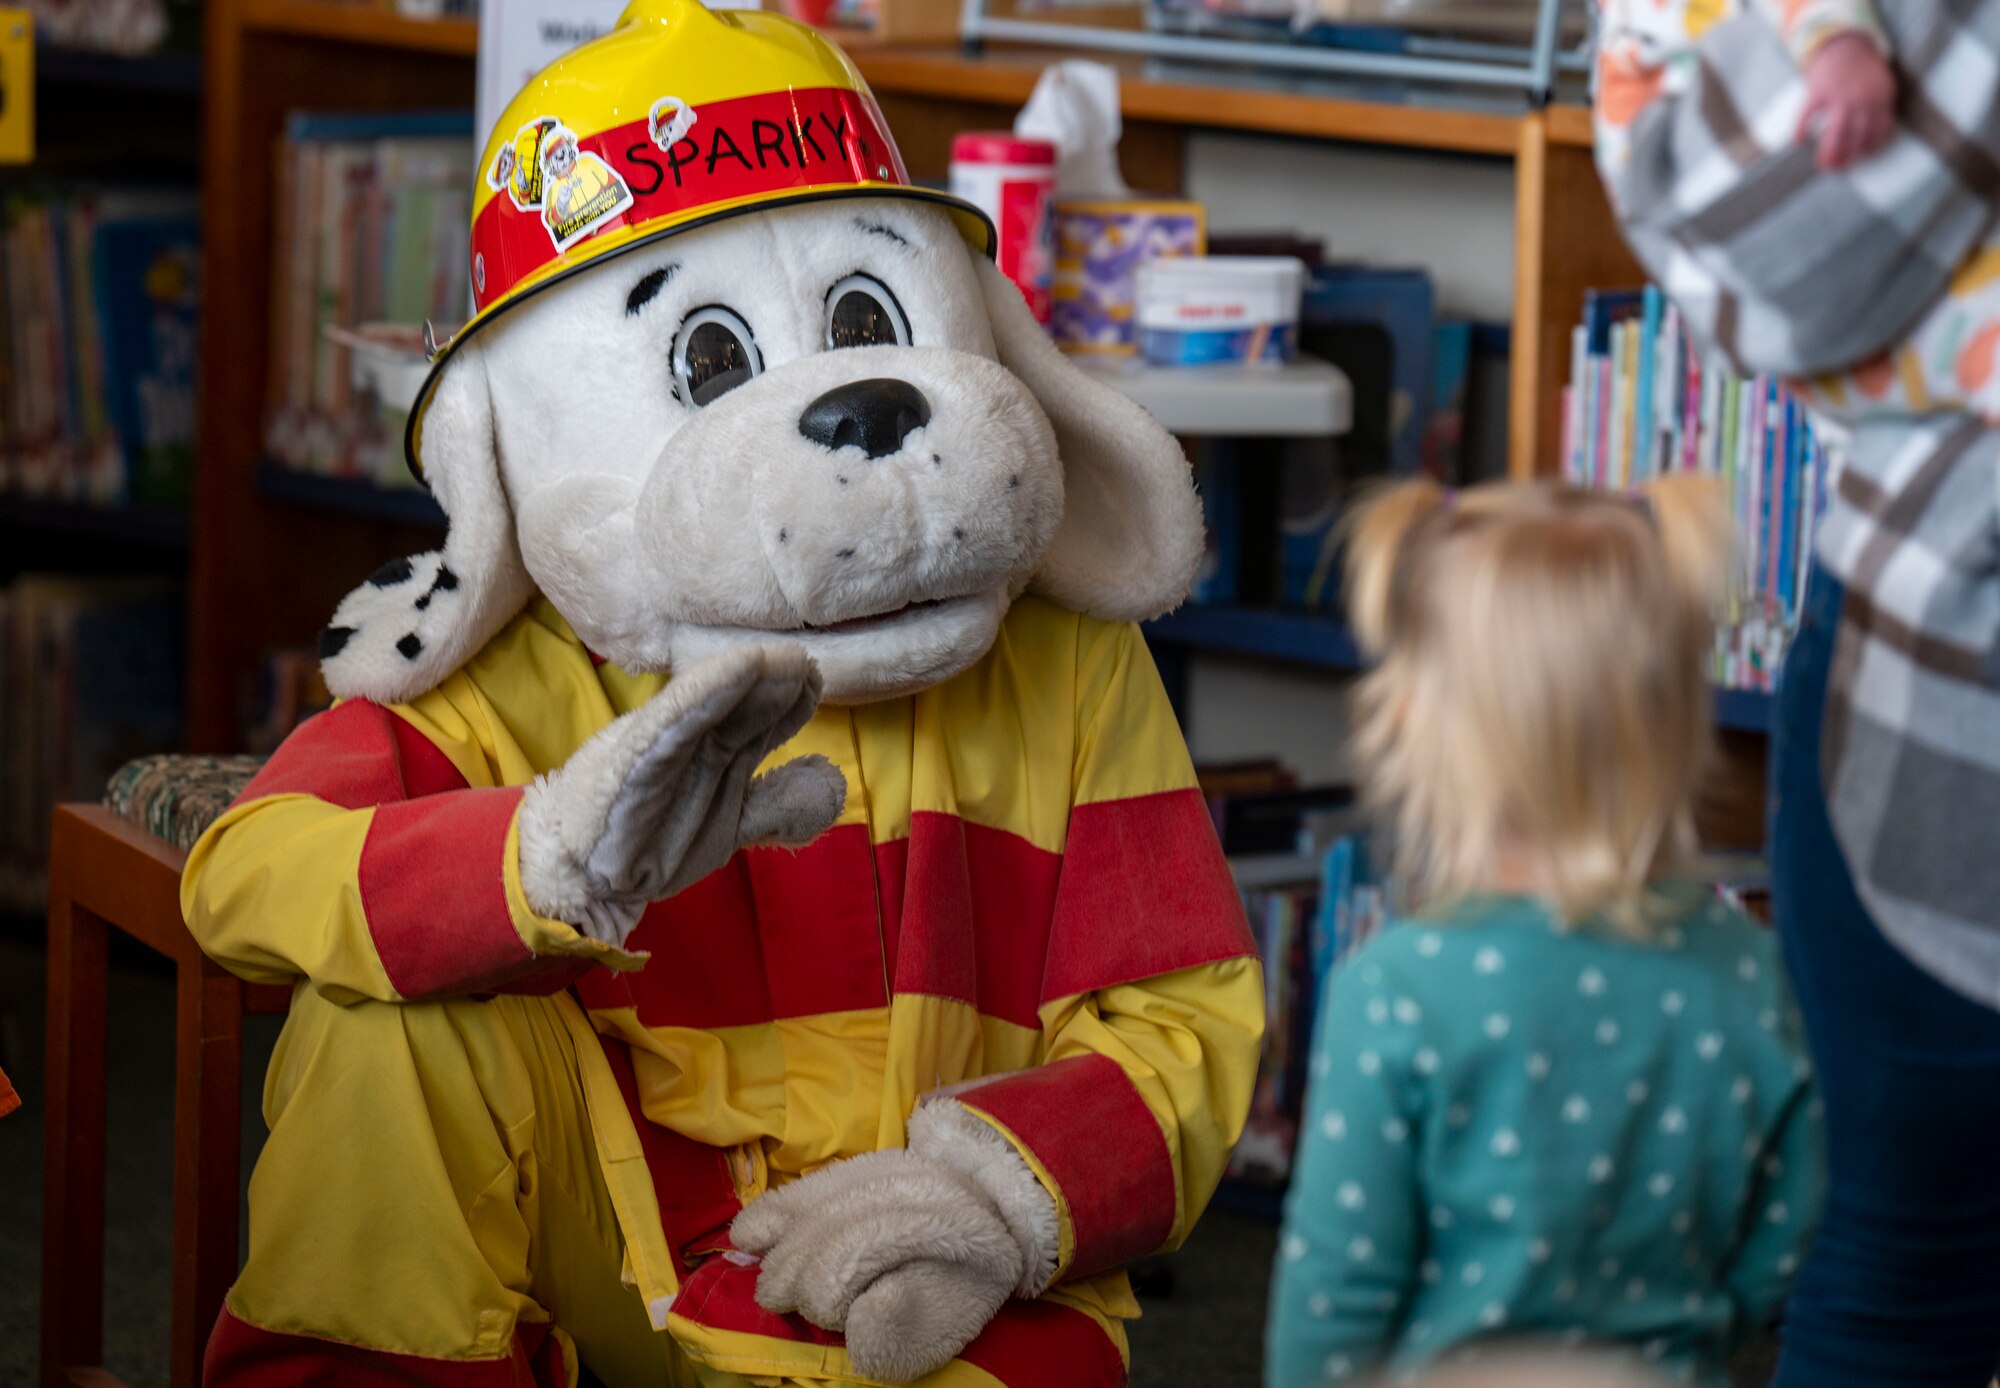 Sparky the fire dog, the mascot for the National Fire Protection Association, waves to a child.